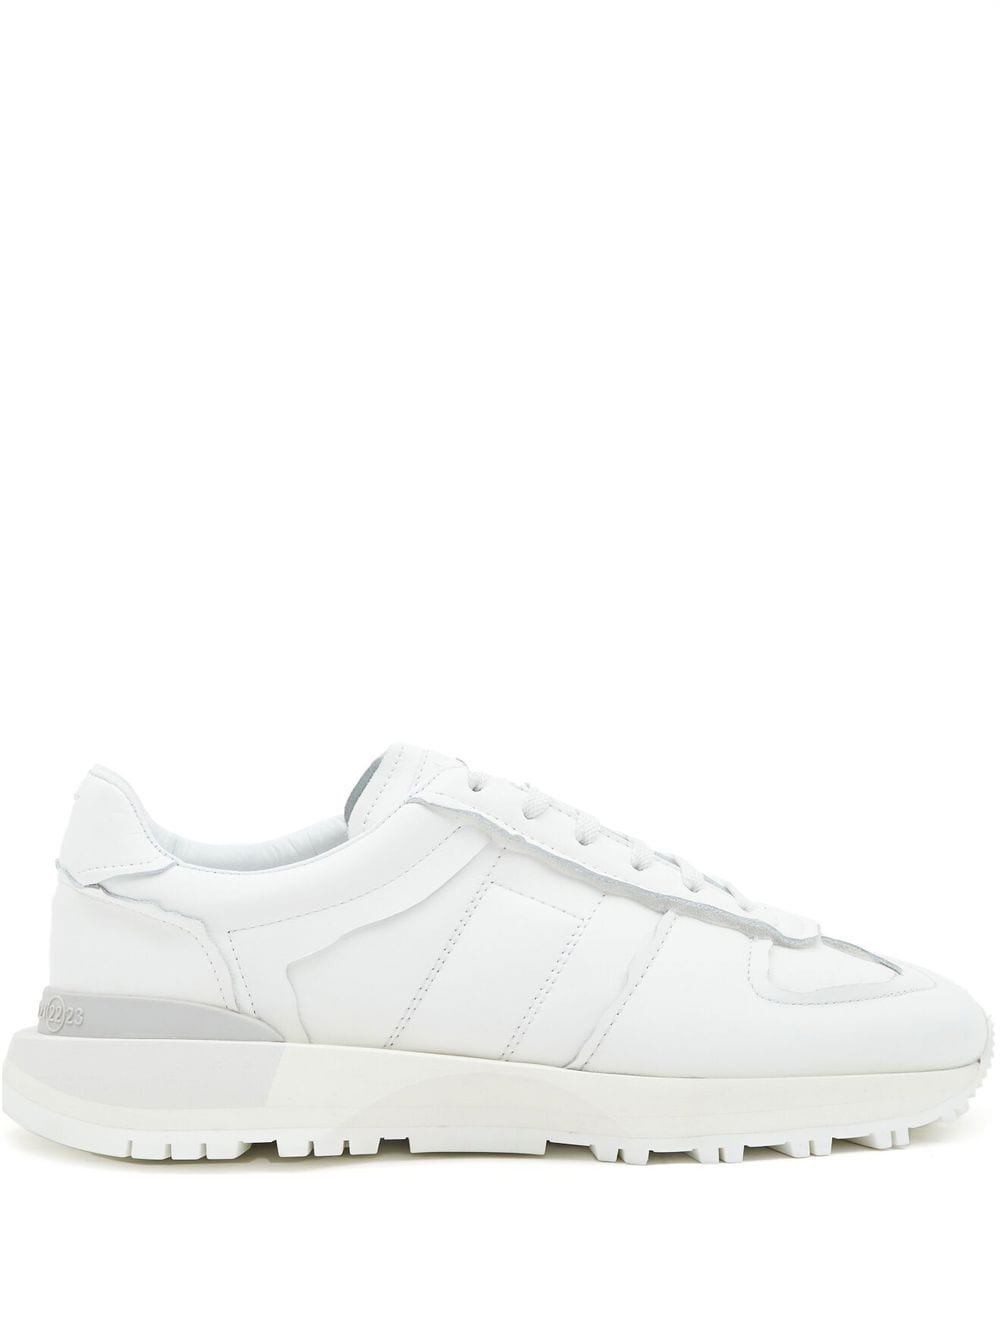 Maison Margiela Low-top Leather Trainers In White